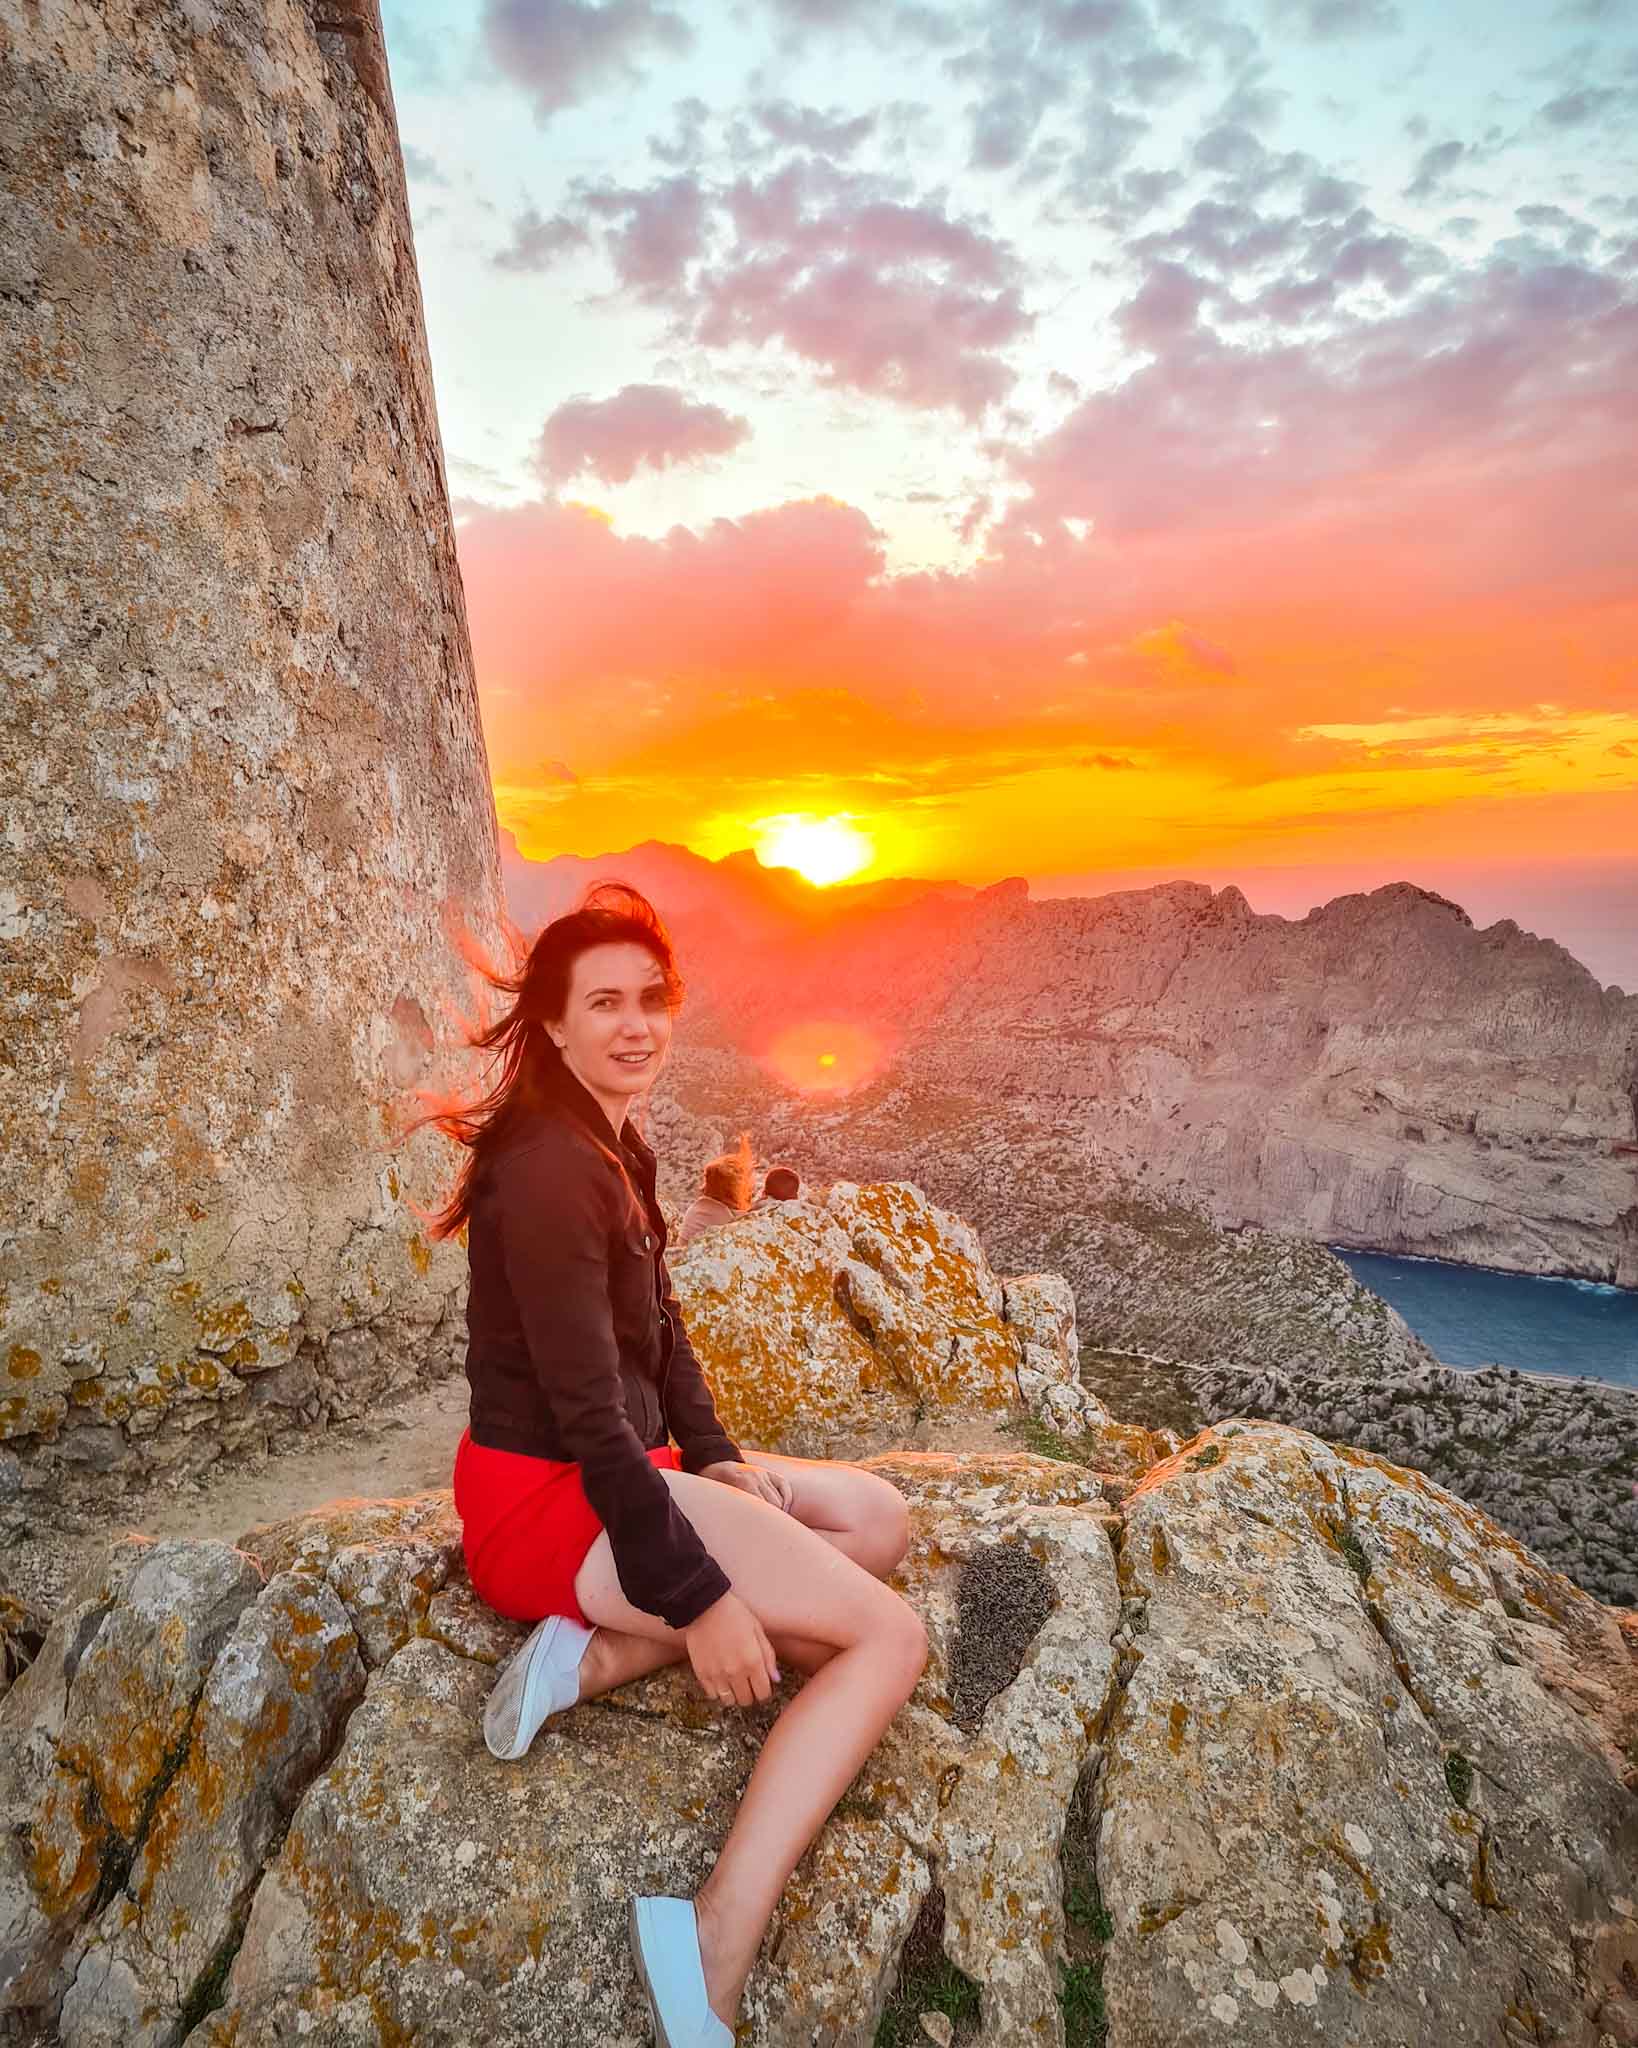 Best way to end the day: 7 easy spots for a magical sunset in Mallorca